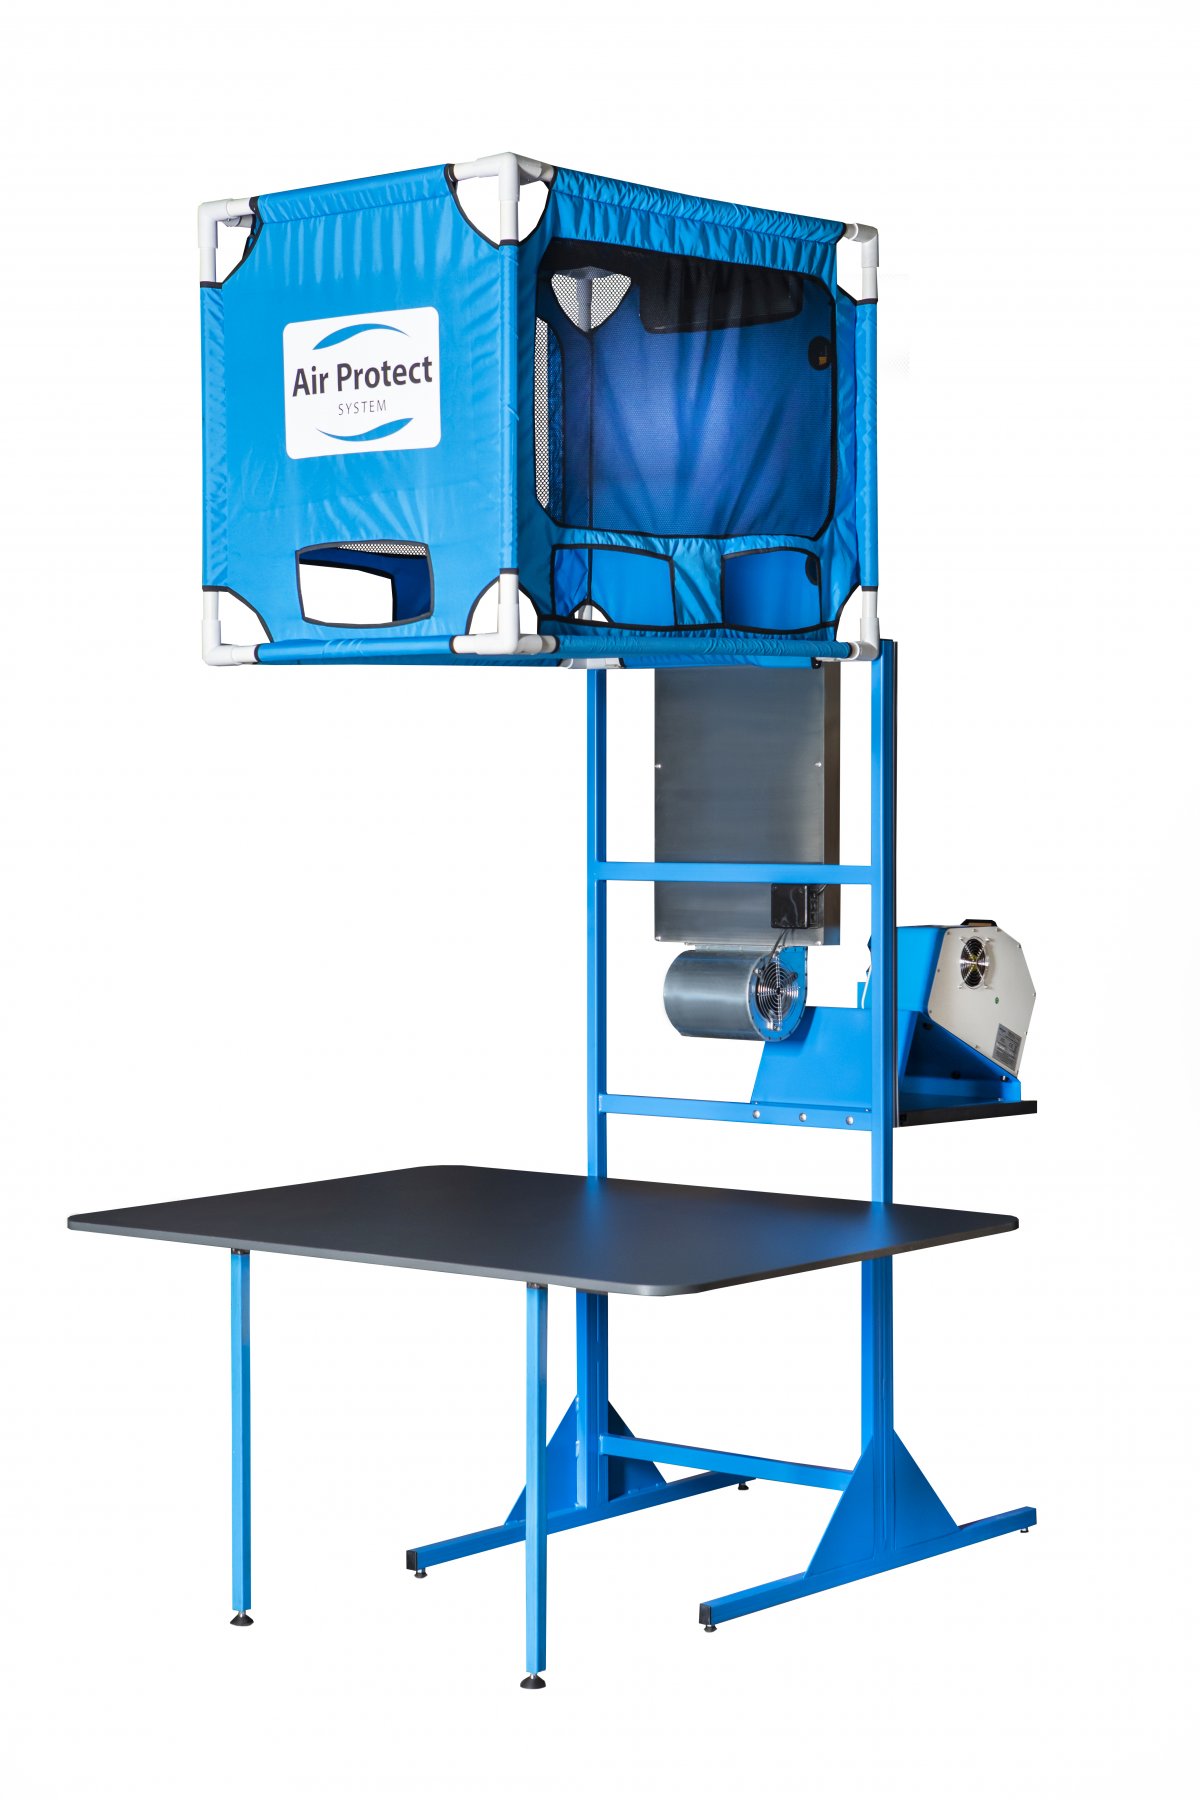 Air Protect system - packing station with workbench